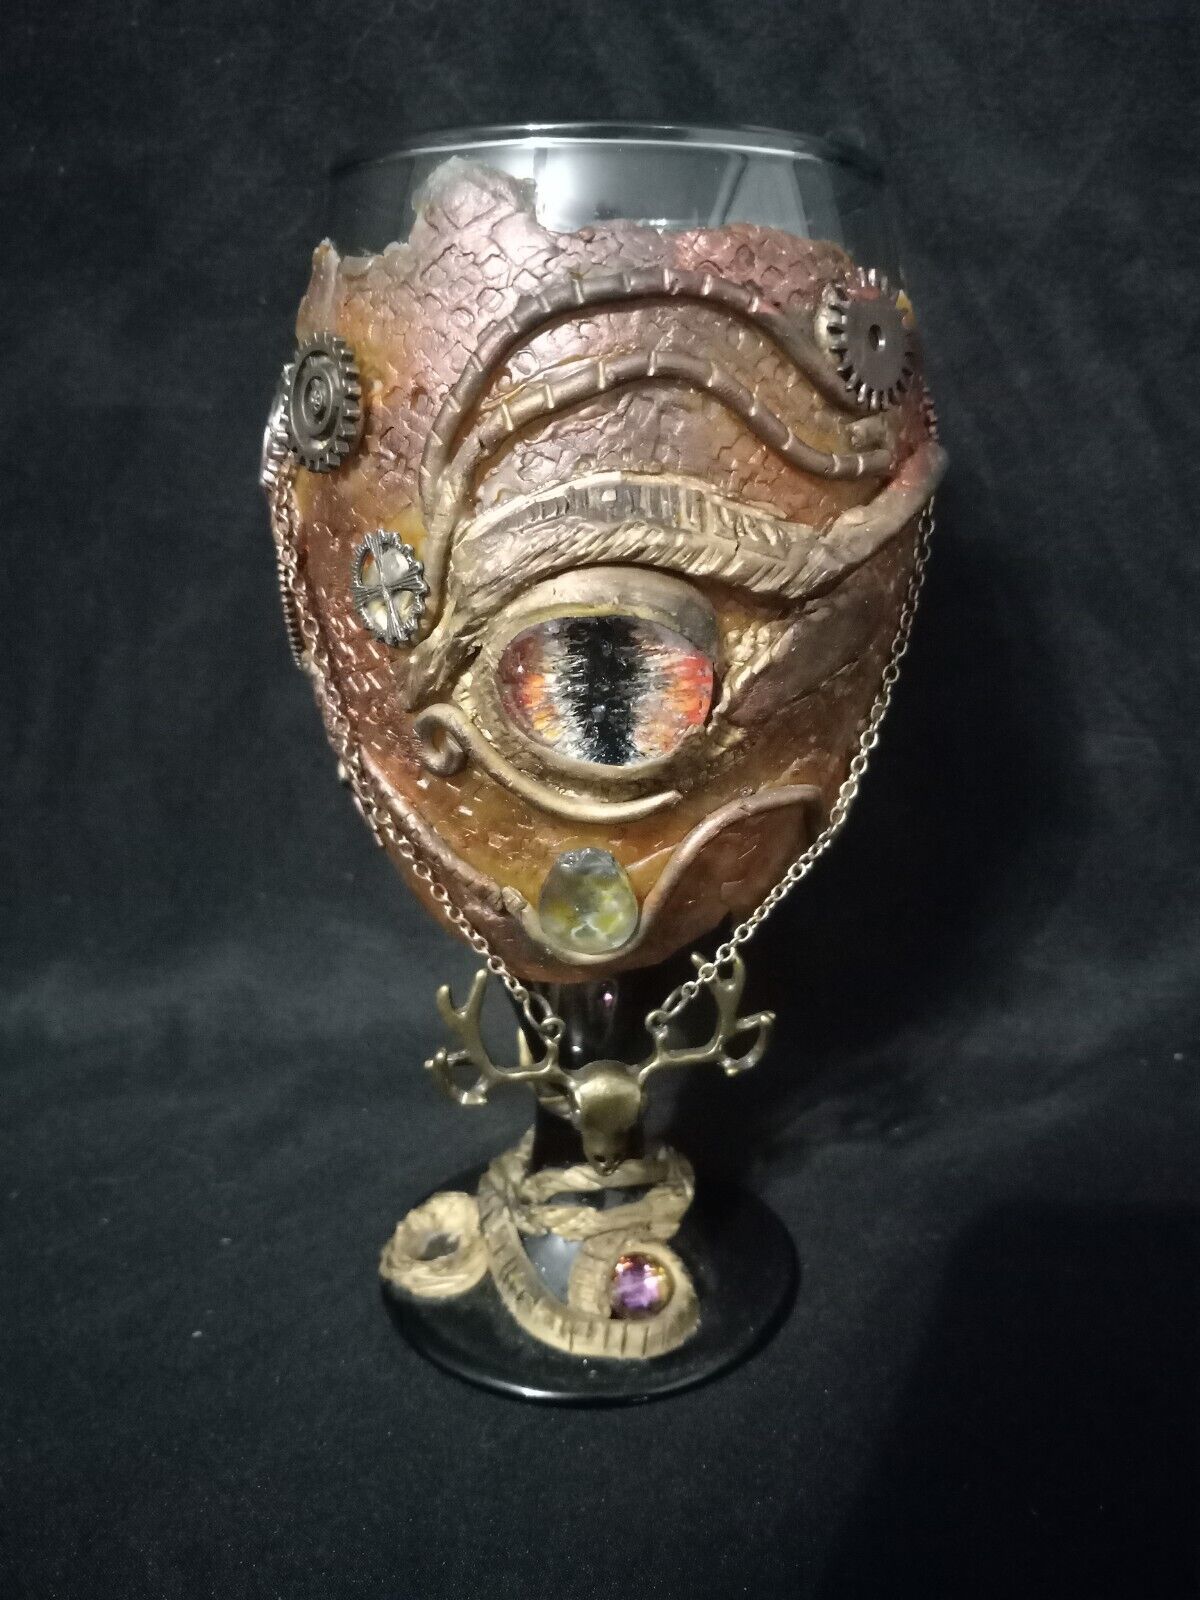 Creepy Dragon Eye Glass Goblet D&D Halloween Necronomicon Chalice -One of a kind